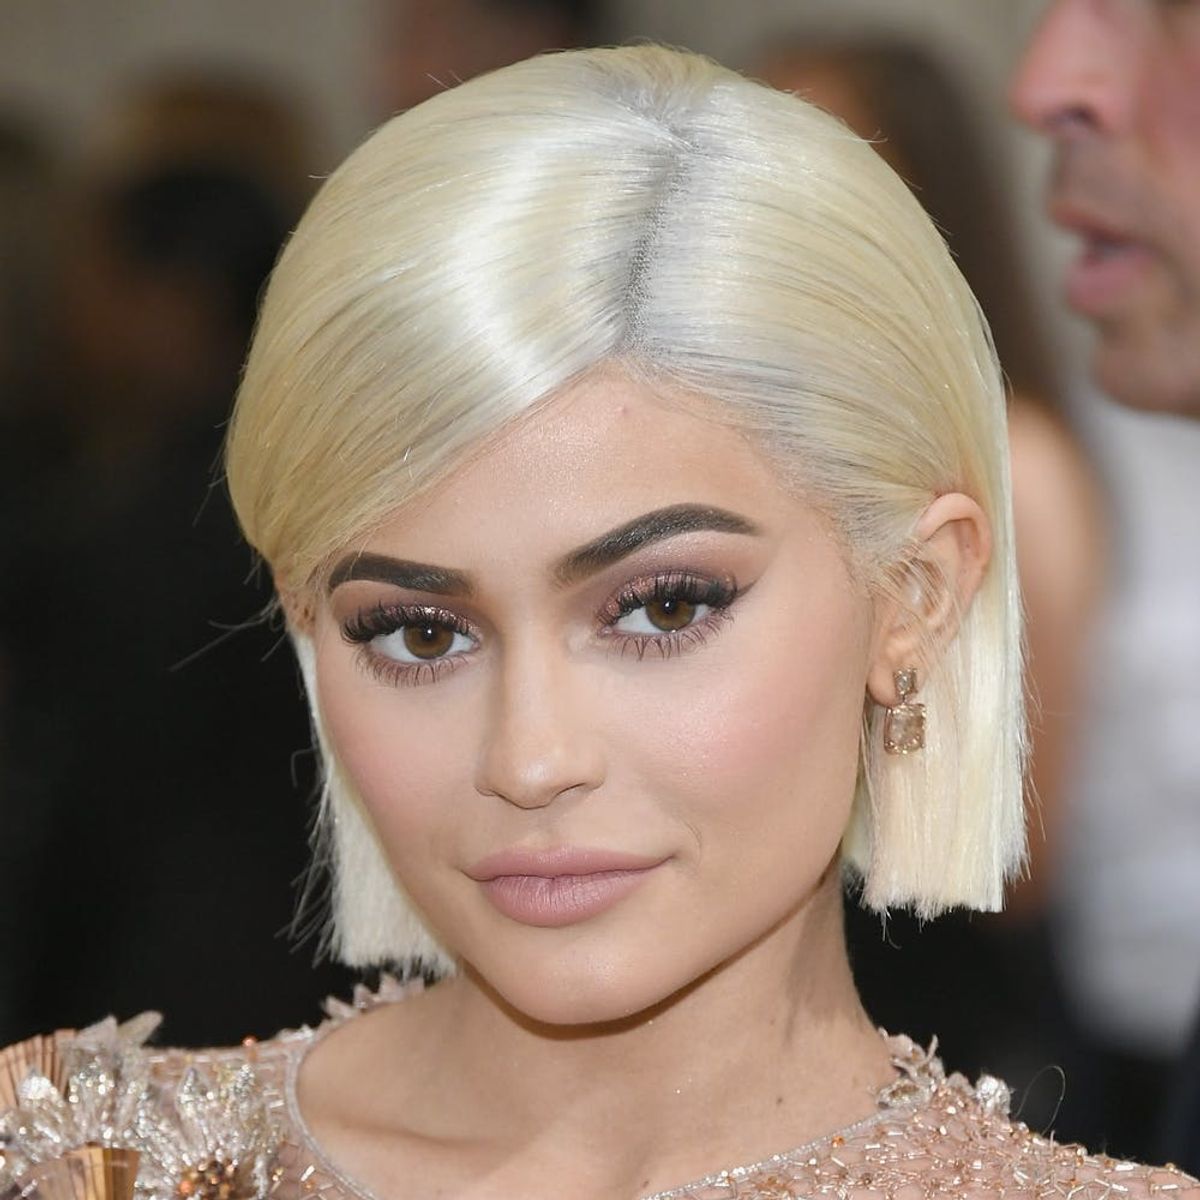 Kylie Jenner’s Fans Think She May Have Already Given Birth